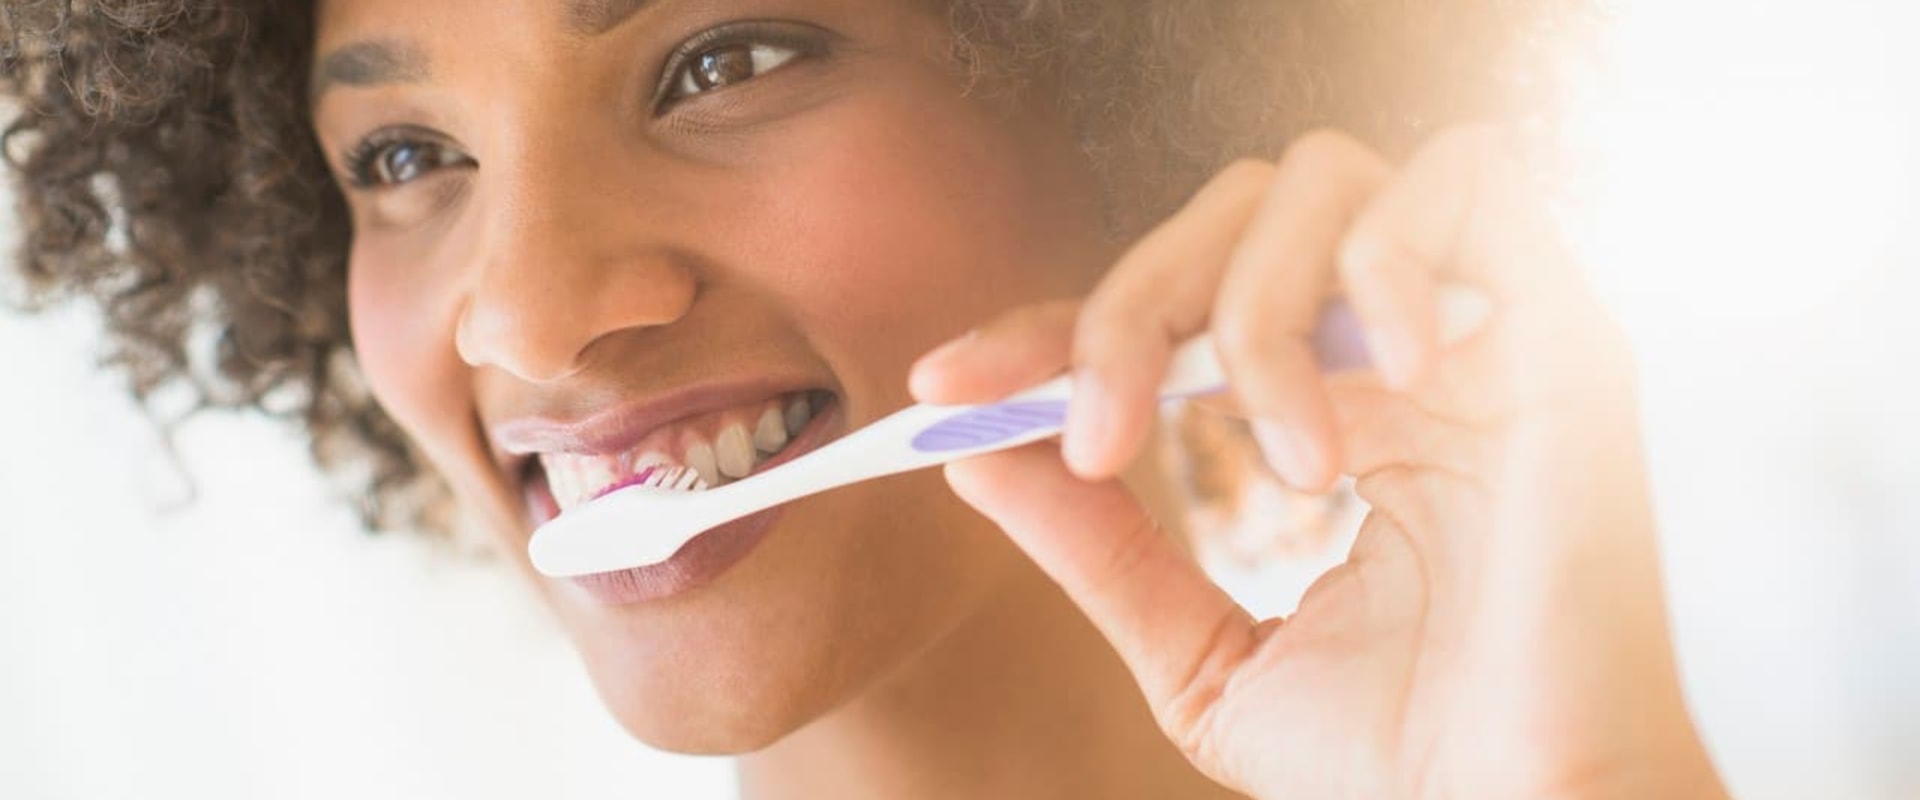 Whitening Toothpaste Ingredients: An Informative Overview